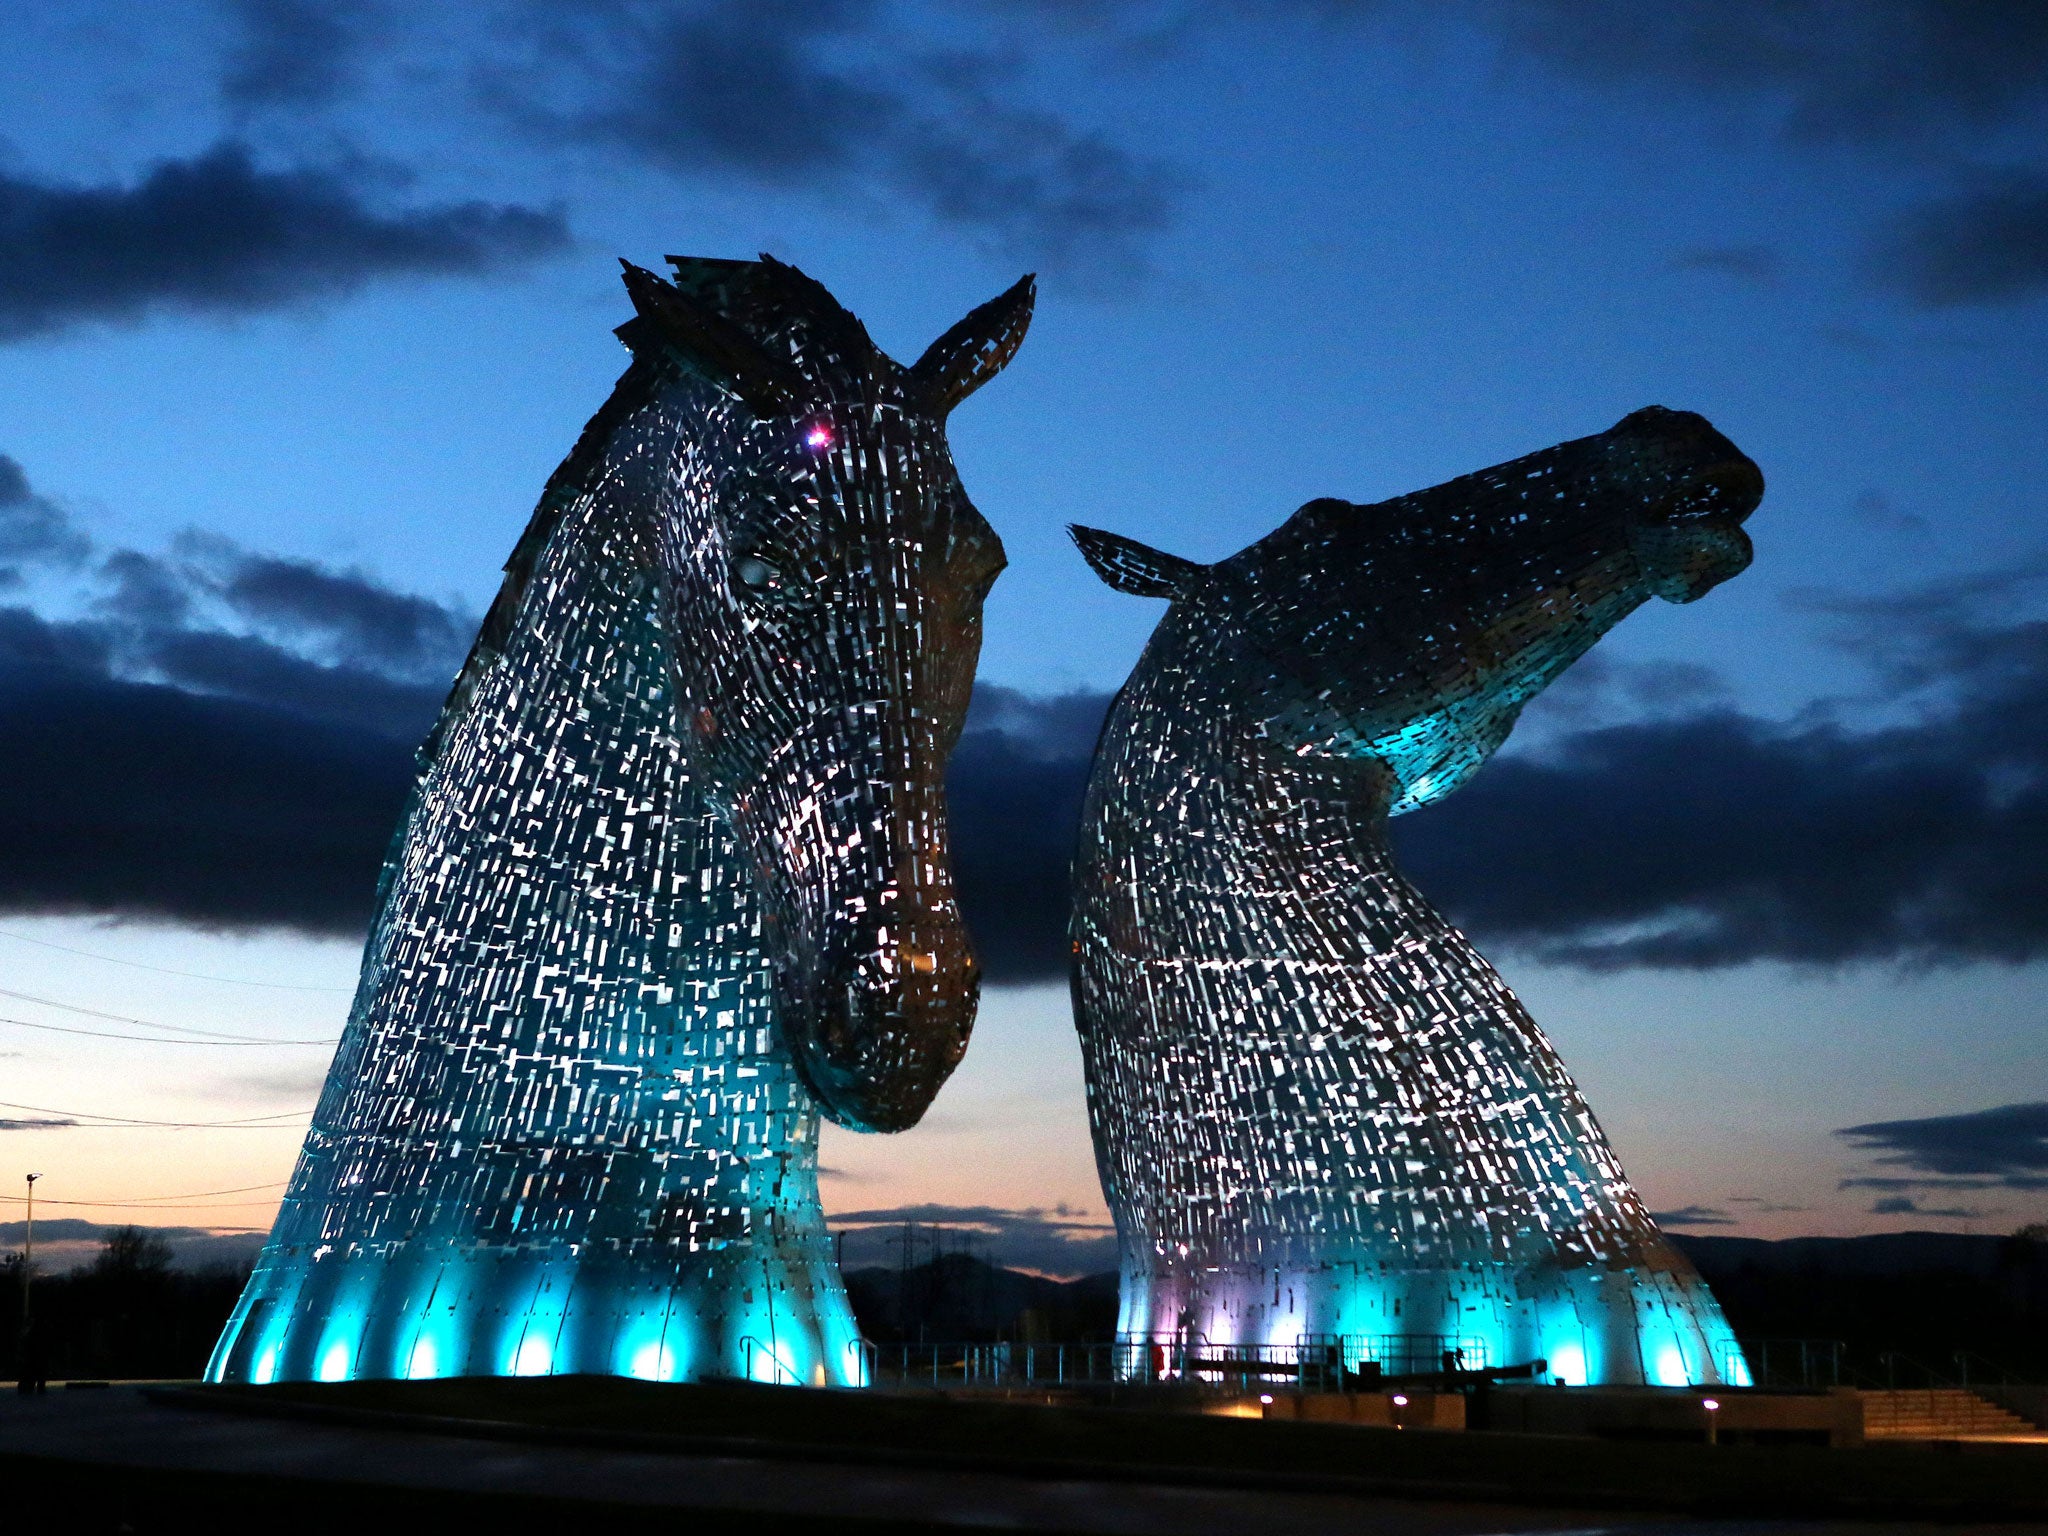 The Kelpies by sculptor Andy Scott